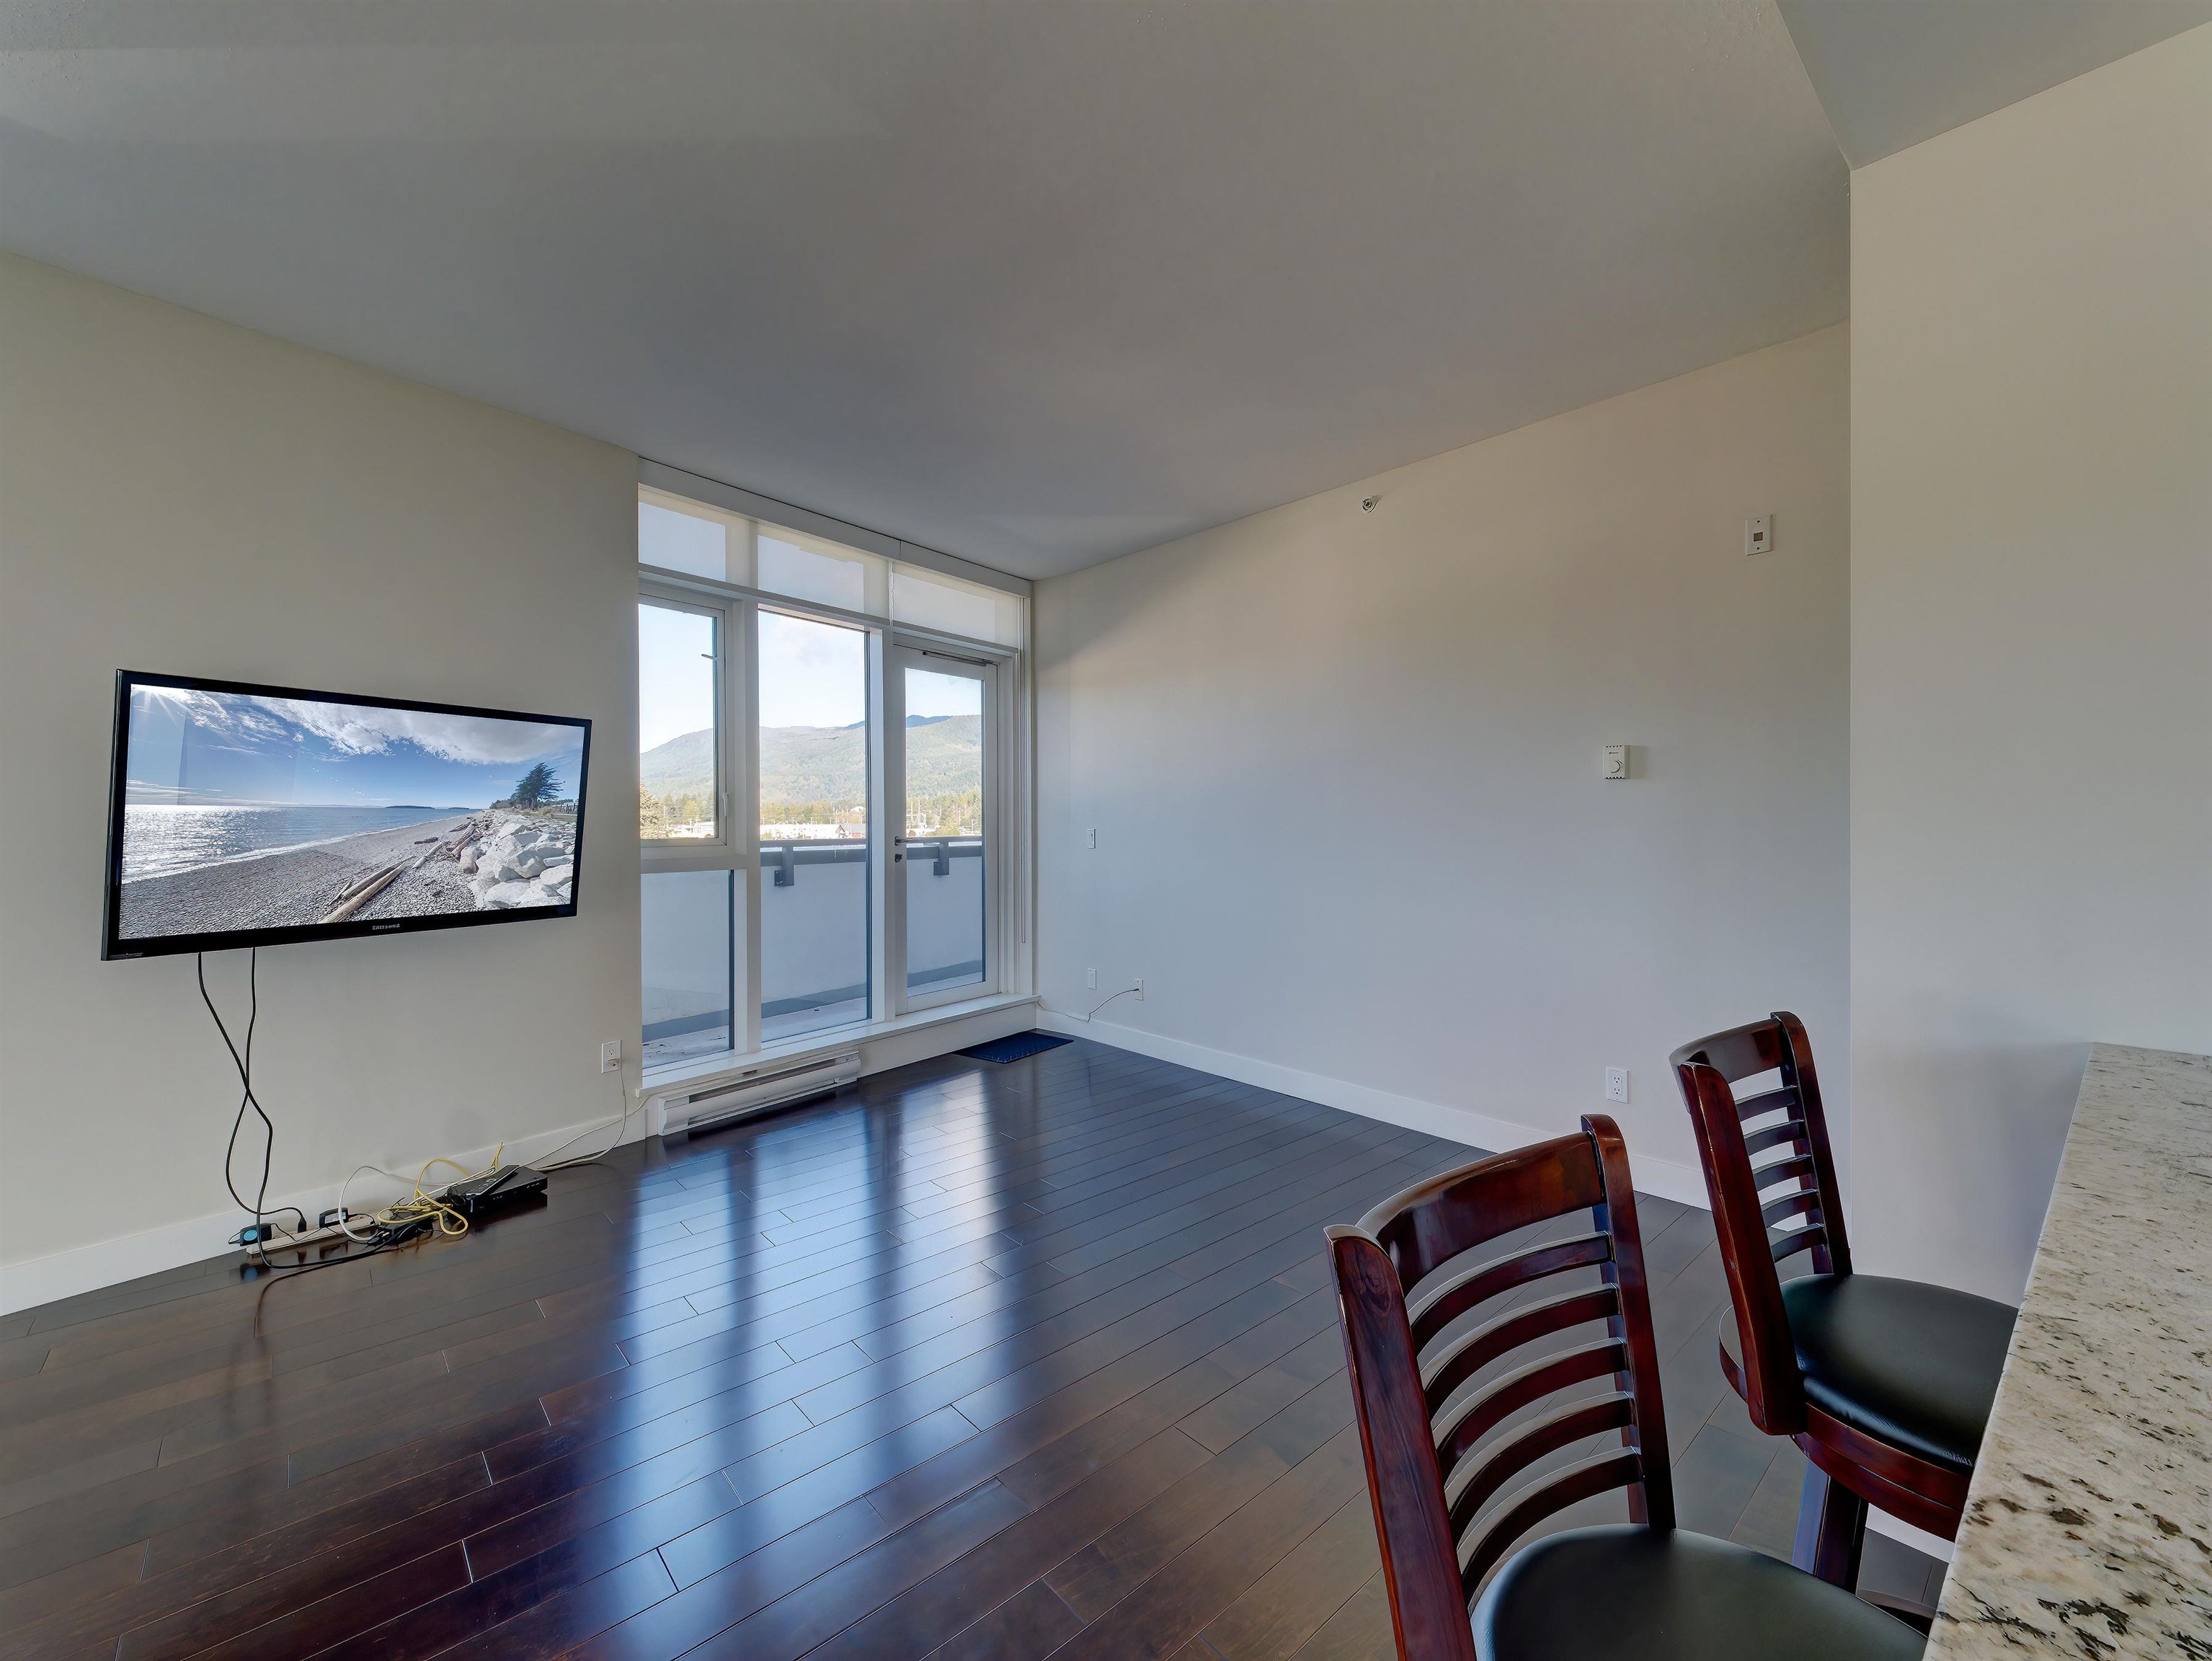 This area lends itself nicely to a family room/t.v. area or home office. Sliders lead to a long deck where both bedrooms sliding doors have access to. The North deck enjoys views of the downtown hustle and bustle and the Inlet mountains.